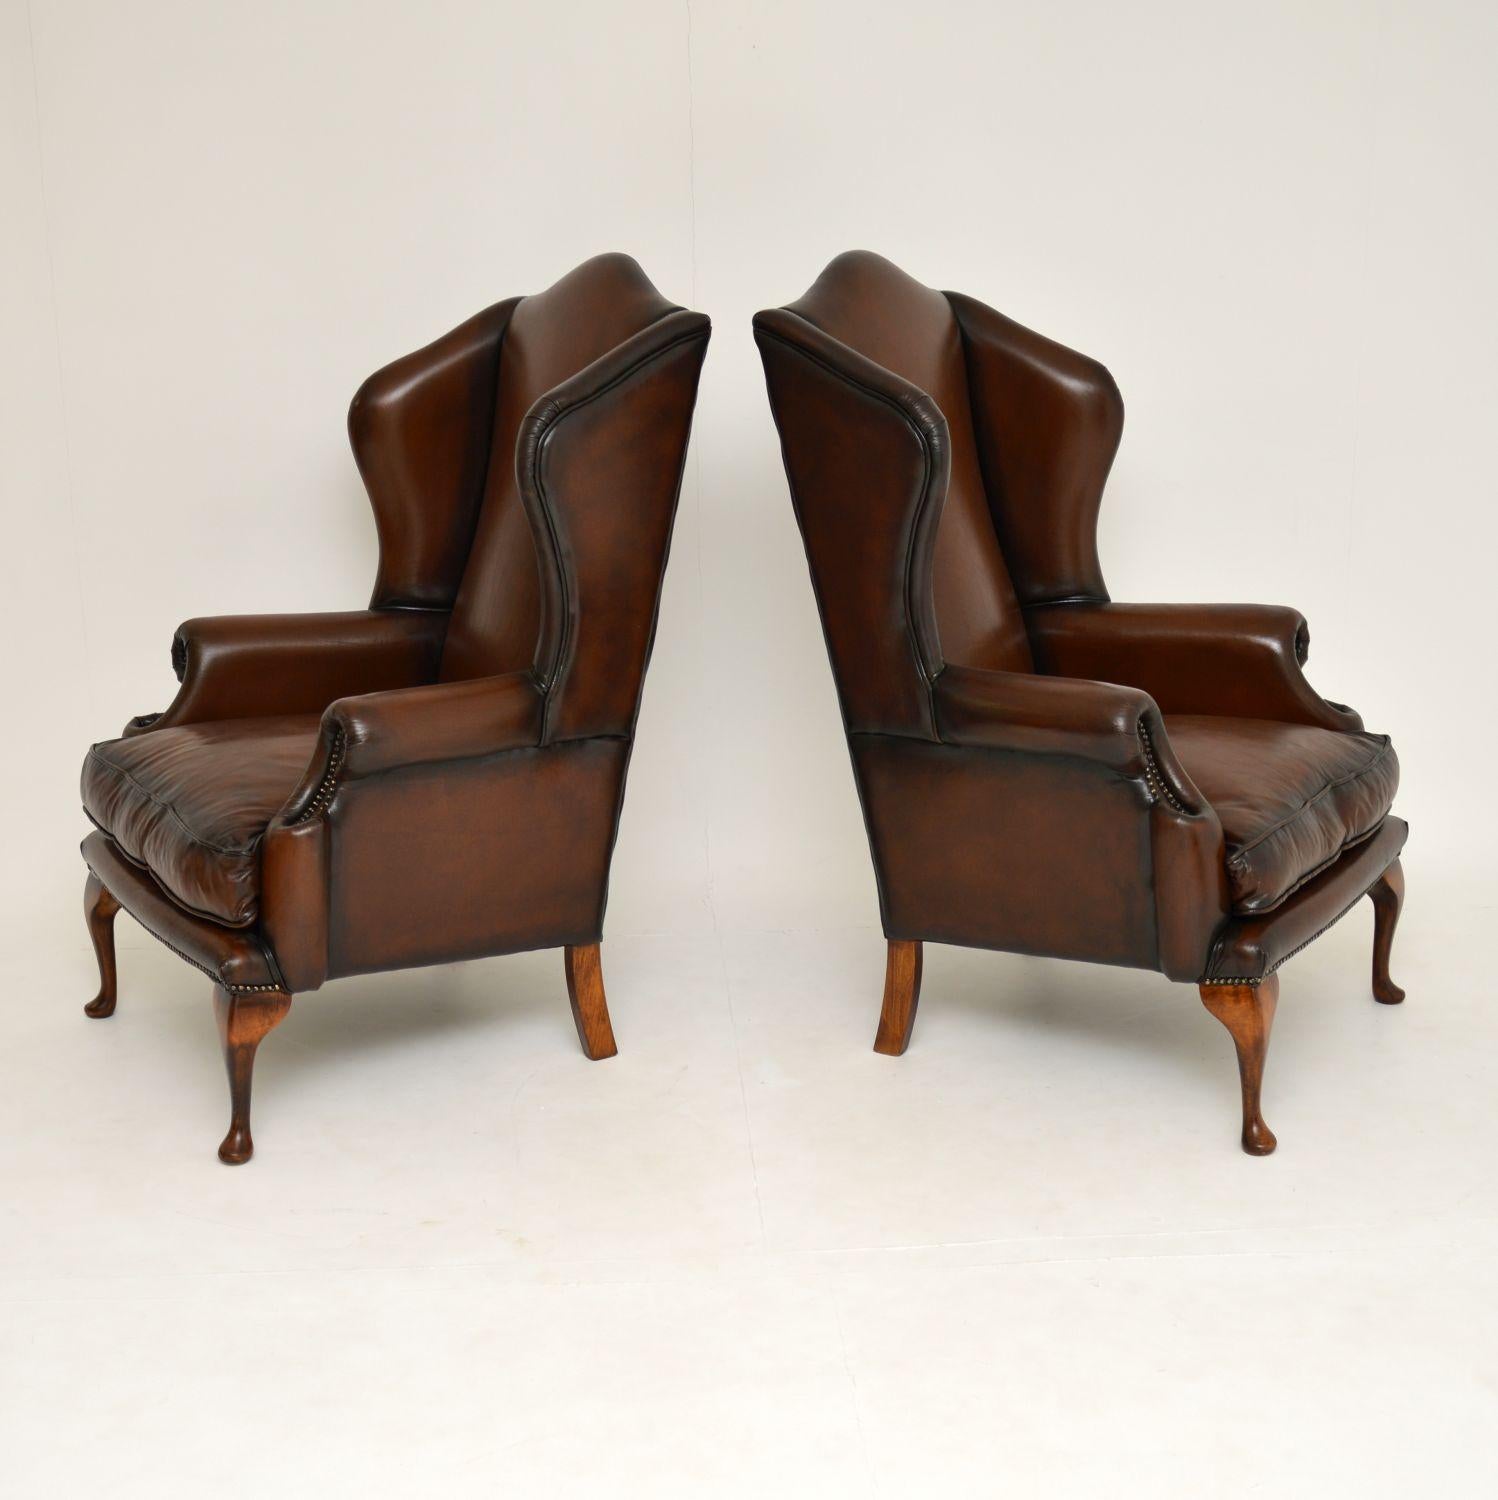 English Pair of Antique Georgian Style Leather Wingback Armchairs